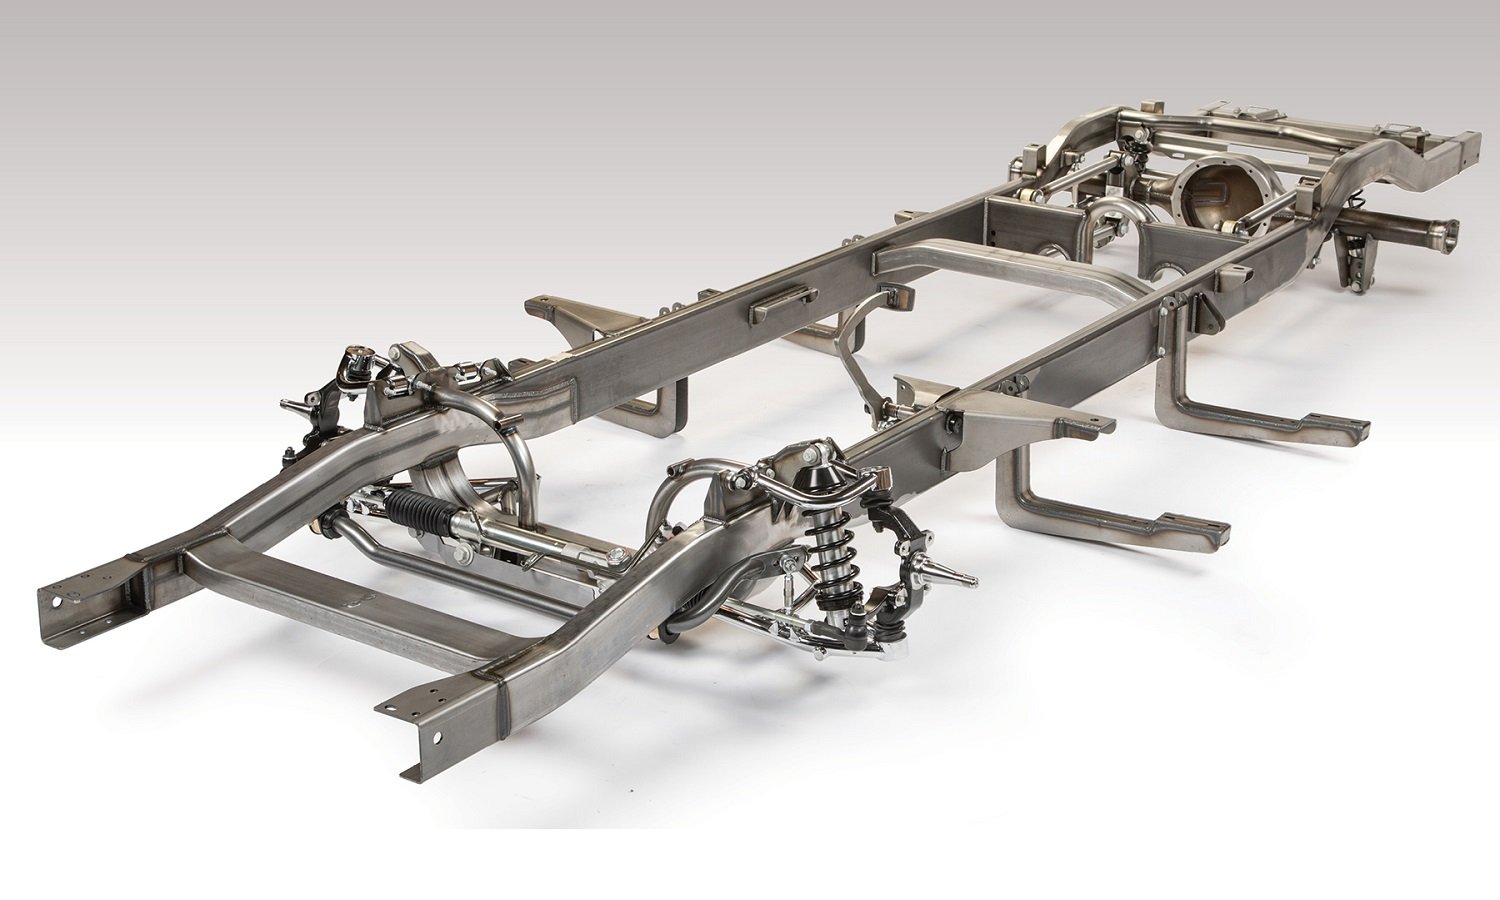 Art Morrison Releases GT Sport Chassis For The 1953-56 Ford F100.